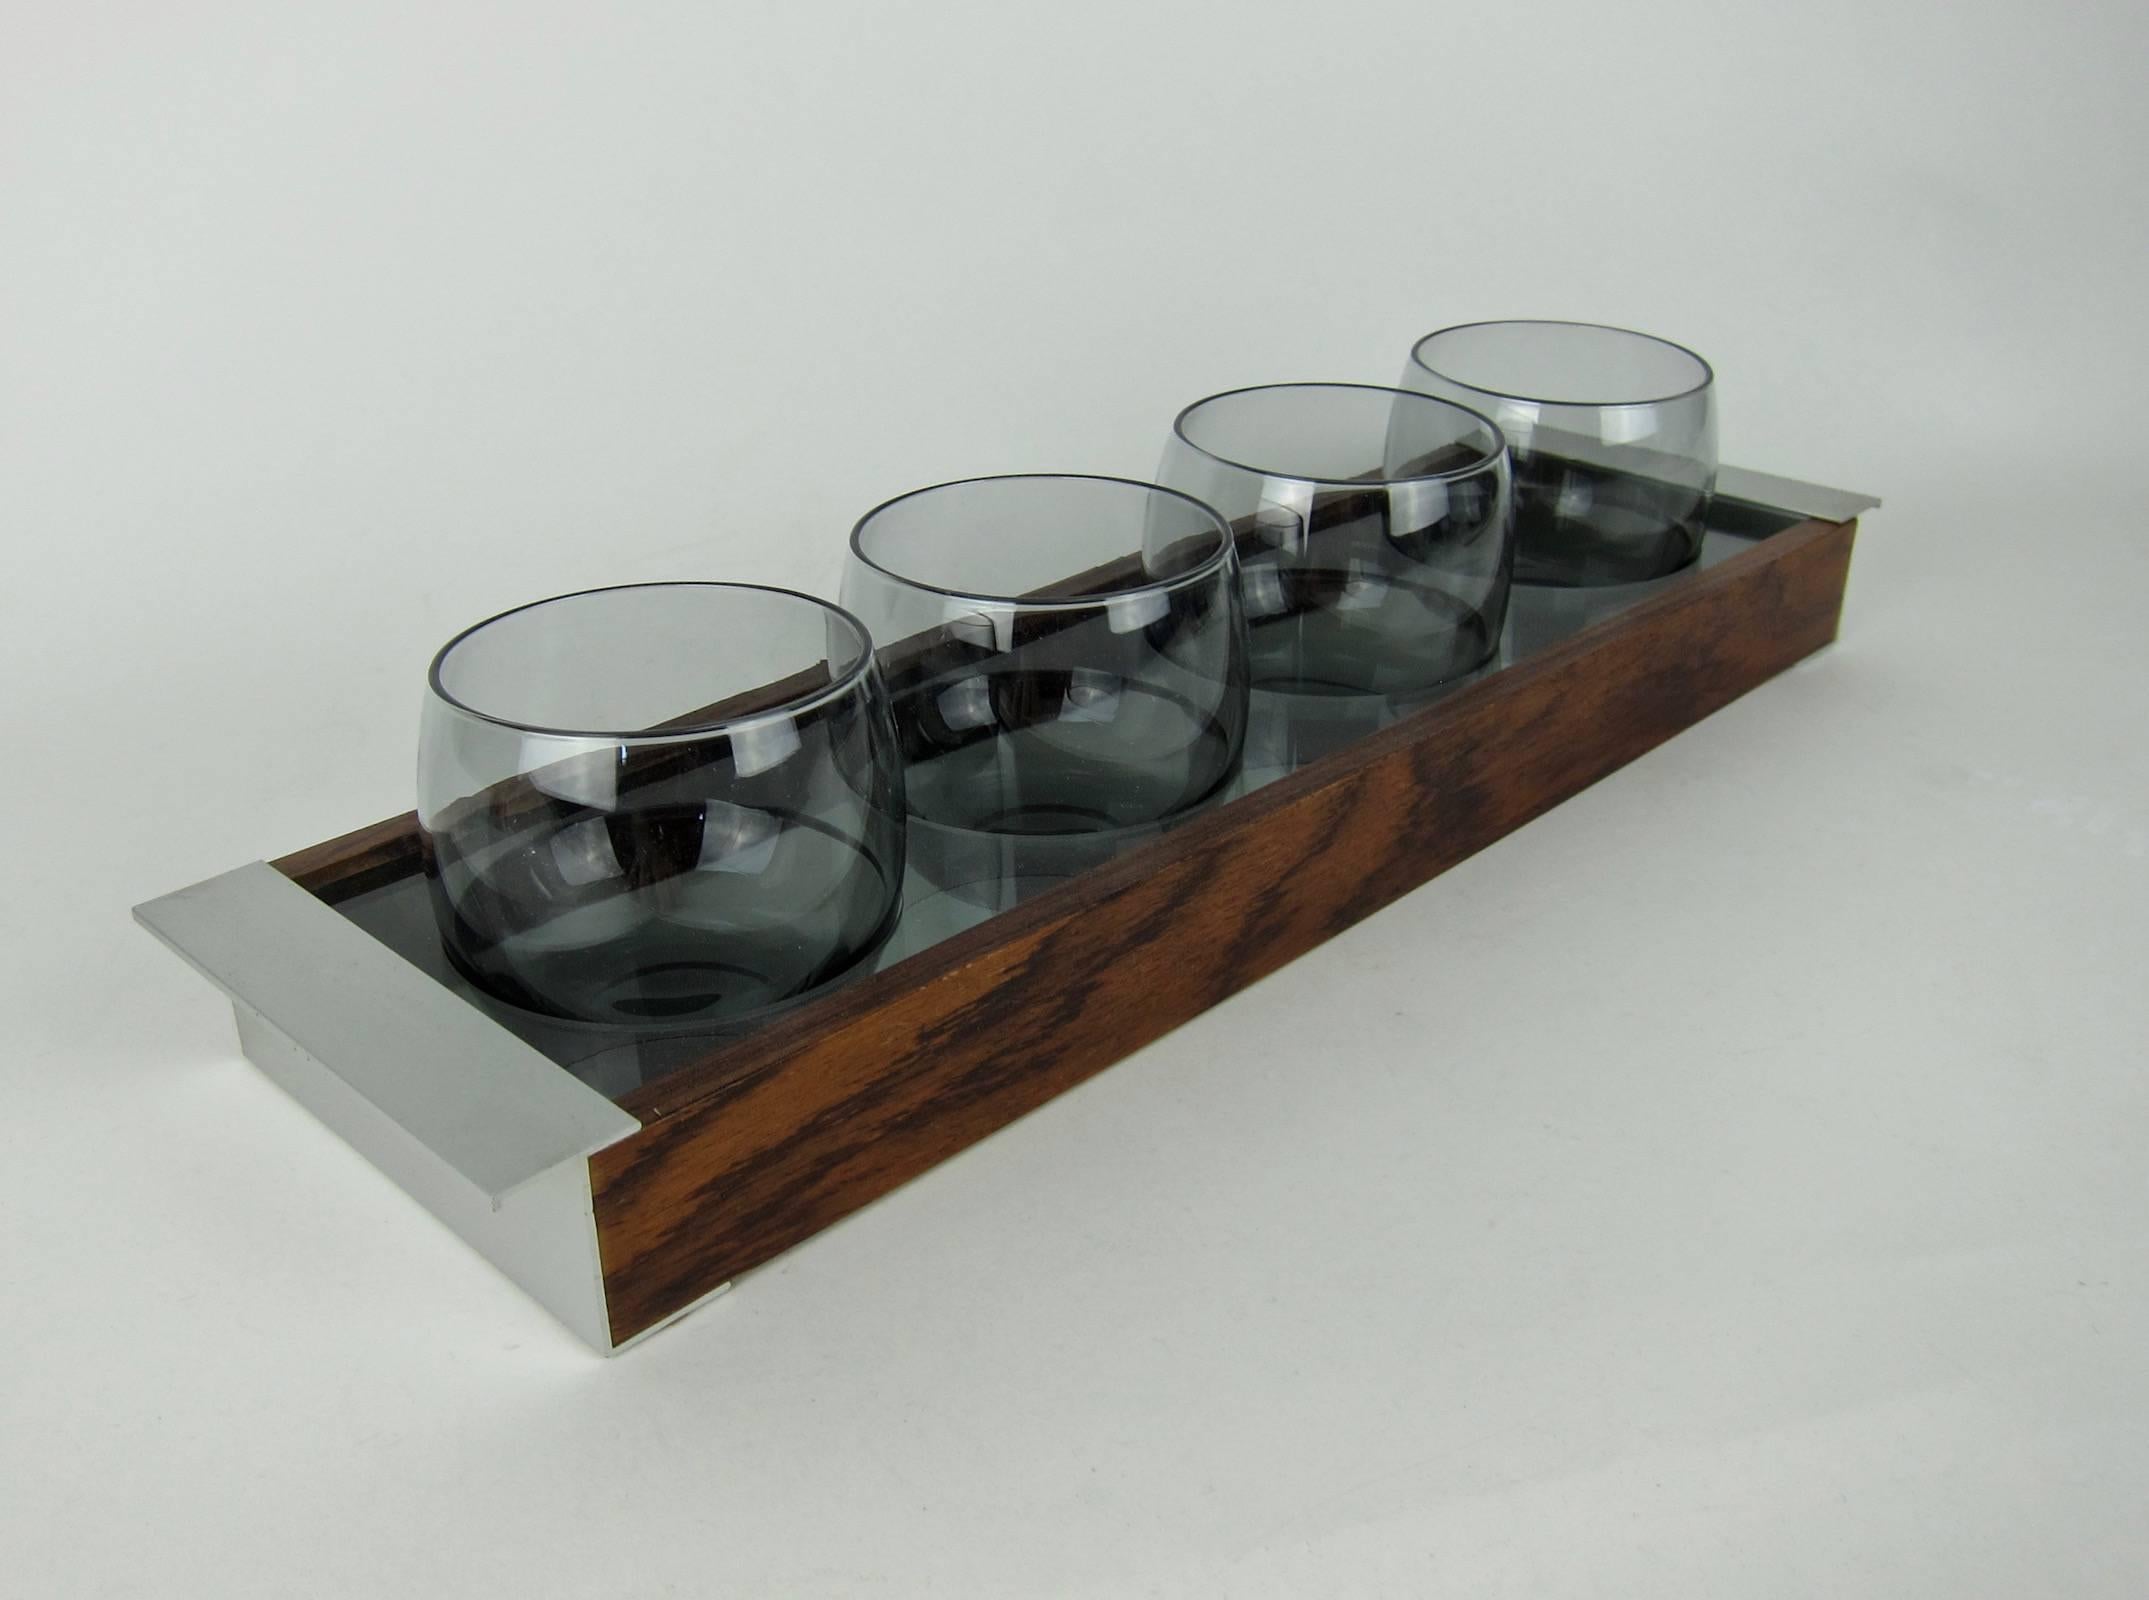 A stylish Scandinavian Modern glassware caddy with four roly-poly glasses from Design Philipp of Sweden, a former Royal Warrant Holder of the Swedish Court.

The tray is made of handsome, light-weight grained wood with contrasting handles of brushed